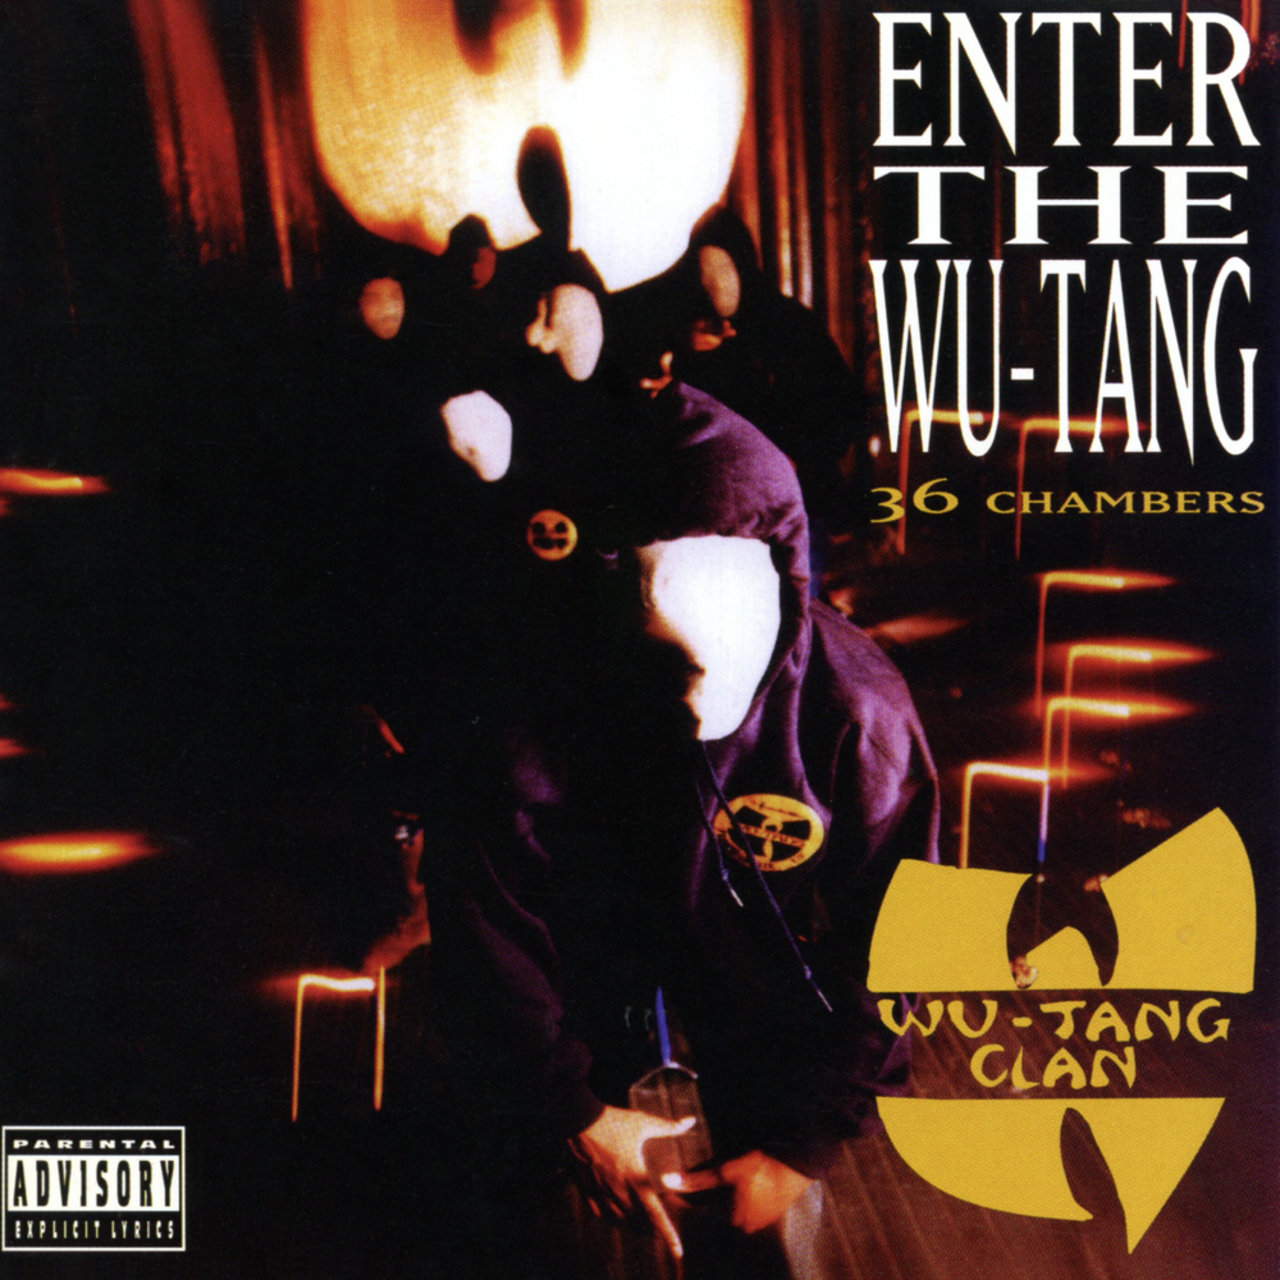 Enter the Wu-Tang (36 Chambers) LP sleeve